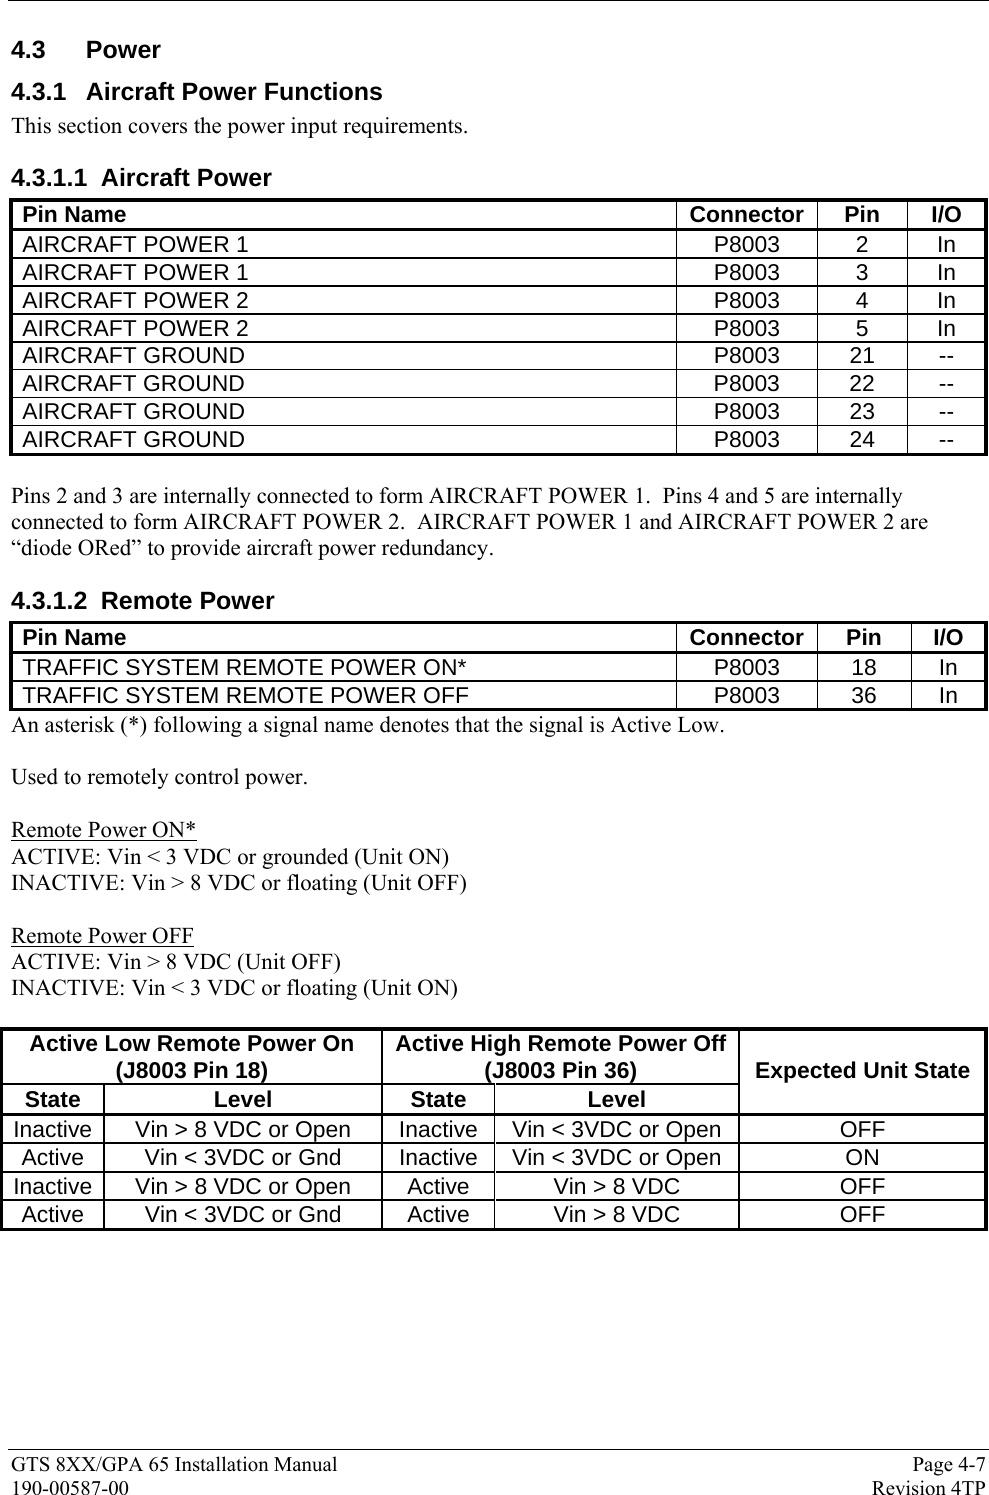  GTS 8XX/GPA 65 Installation Manual  Page 4-7 190-00587-00  Revision 4TP 4.3 Power 4.3.1  Aircraft Power Functions This section covers the power input requirements. 4.3.1.1 Aircraft Power Pin Name  Connector  Pin  I/O AIRCRAFT POWER 1  P8003  2  In AIRCRAFT POWER 1  P8003  3  In AIRCRAFT POWER 2  P8003  4  In AIRCRAFT POWER 2  P8003  5  In AIRCRAFT GROUND  P8003  21  -- AIRCRAFT GROUND P8003 22 -- AIRCRAFT GROUND  P8003  23  -- AIRCRAFT GROUND  P8003  24  --  Pins 2 and 3 are internally connected to form AIRCRAFT POWER 1.  Pins 4 and 5 are internally connected to form AIRCRAFT POWER 2.  AIRCRAFT POWER 1 and AIRCRAFT POWER 2 are “diode ORed” to provide aircraft power redundancy. 4.3.1.2 Remote Power Pin Name  Connector  Pin  I/O TRAFFIC SYSTEM REMOTE POWER ON*  P8003  18  In TRAFFIC SYSTEM REMOTE POWER OFF  P8003  36  In An asterisk (*) following a signal name denotes that the signal is Active Low.  Used to remotely control power.  Remote Power ON* ACTIVE: Vin &lt; 3 VDC or grounded (Unit ON) INACTIVE: Vin &gt; 8 VDC or floating (Unit OFF)  Remote Power OFF ACTIVE: Vin &gt; 8 VDC (Unit OFF) INACTIVE: Vin &lt; 3 VDC or floating (Unit ON)  Active Low Remote Power On  (J8003 Pin 18)  Active High Remote Power Off(J8003 Pin 36) State Level  State Level Expected Unit State Inactive  Vin &gt; 8 VDC or Open  Inactive  Vin &lt; 3VDC or Open  OFF Active  Vin &lt; 3VDC or Gnd  Inactive  Vin &lt; 3VDC or Open  ON Inactive Vin &gt; 8 VDC or Open  Active  Vin &gt; 8 VDC  OFF Active  Vin &lt; 3VDC or Gnd  Active  Vin &gt; 8 VDC  OFF  